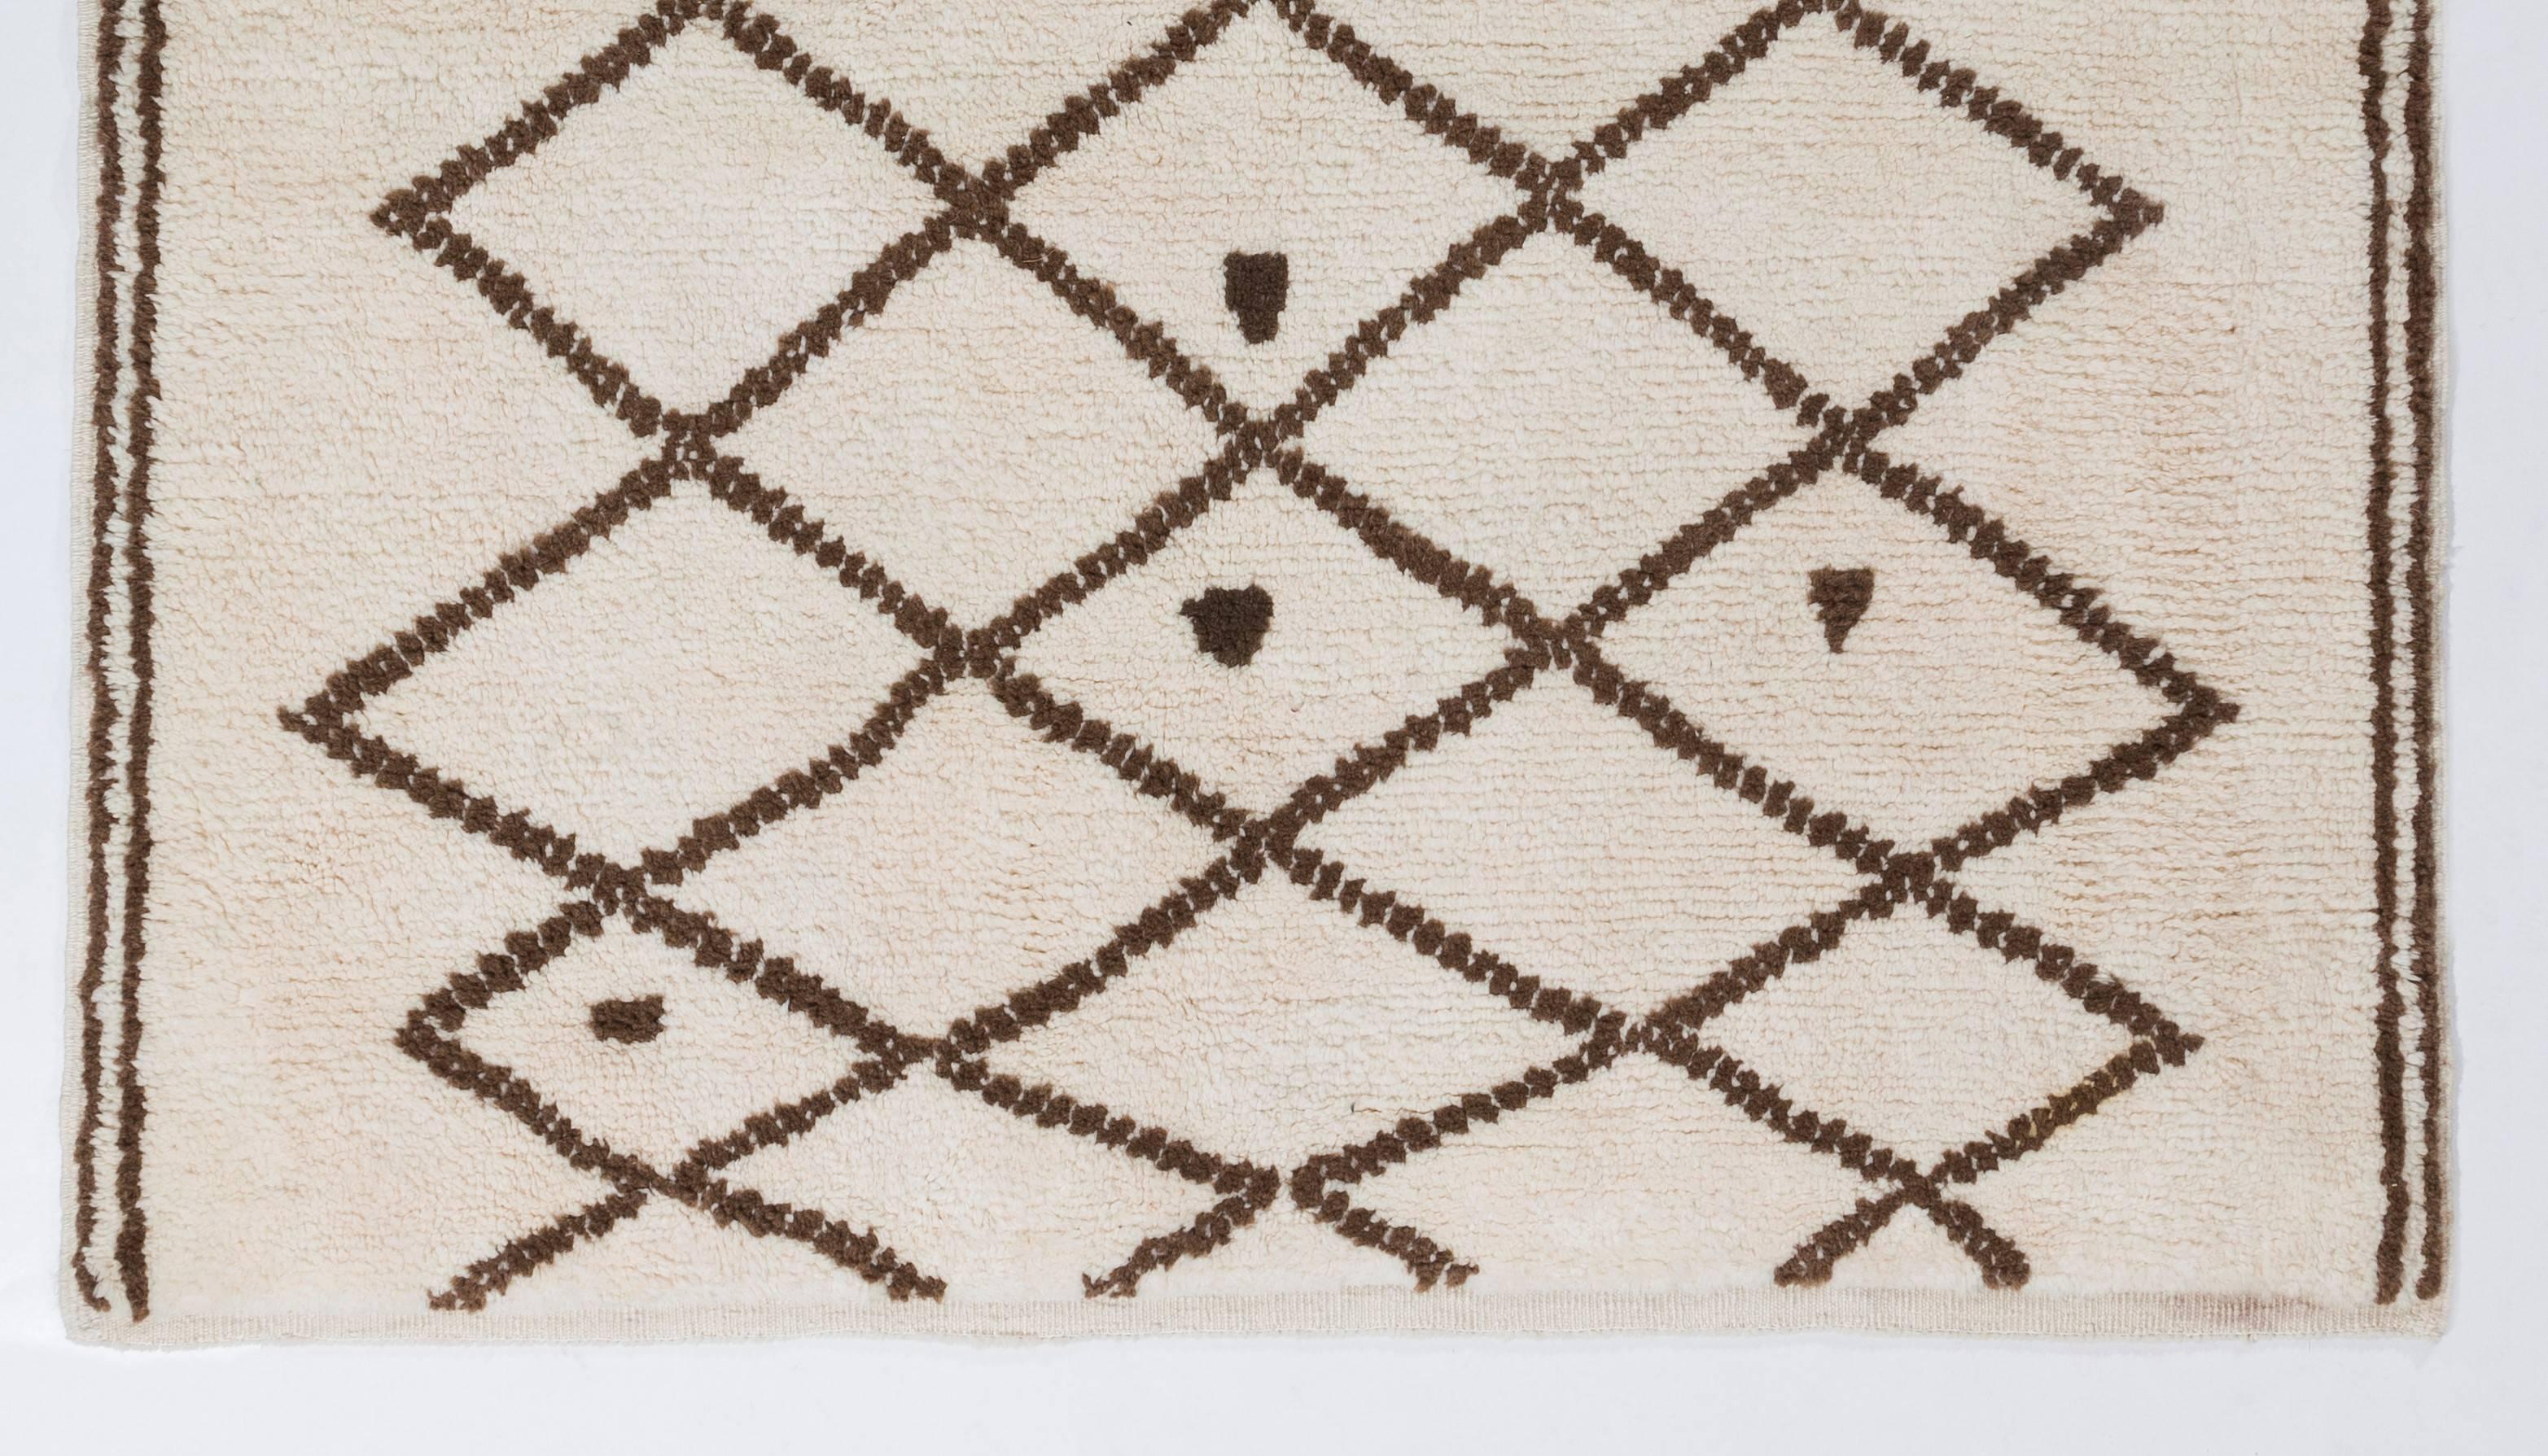 This charming Moroccan rug features a lattice design on an ivory background. Made completely of undyed natural sheep's wool, it has a lush, soft pile and feels great under feet. 

The rug can be custom-produced in any size, color, pattern, weave and